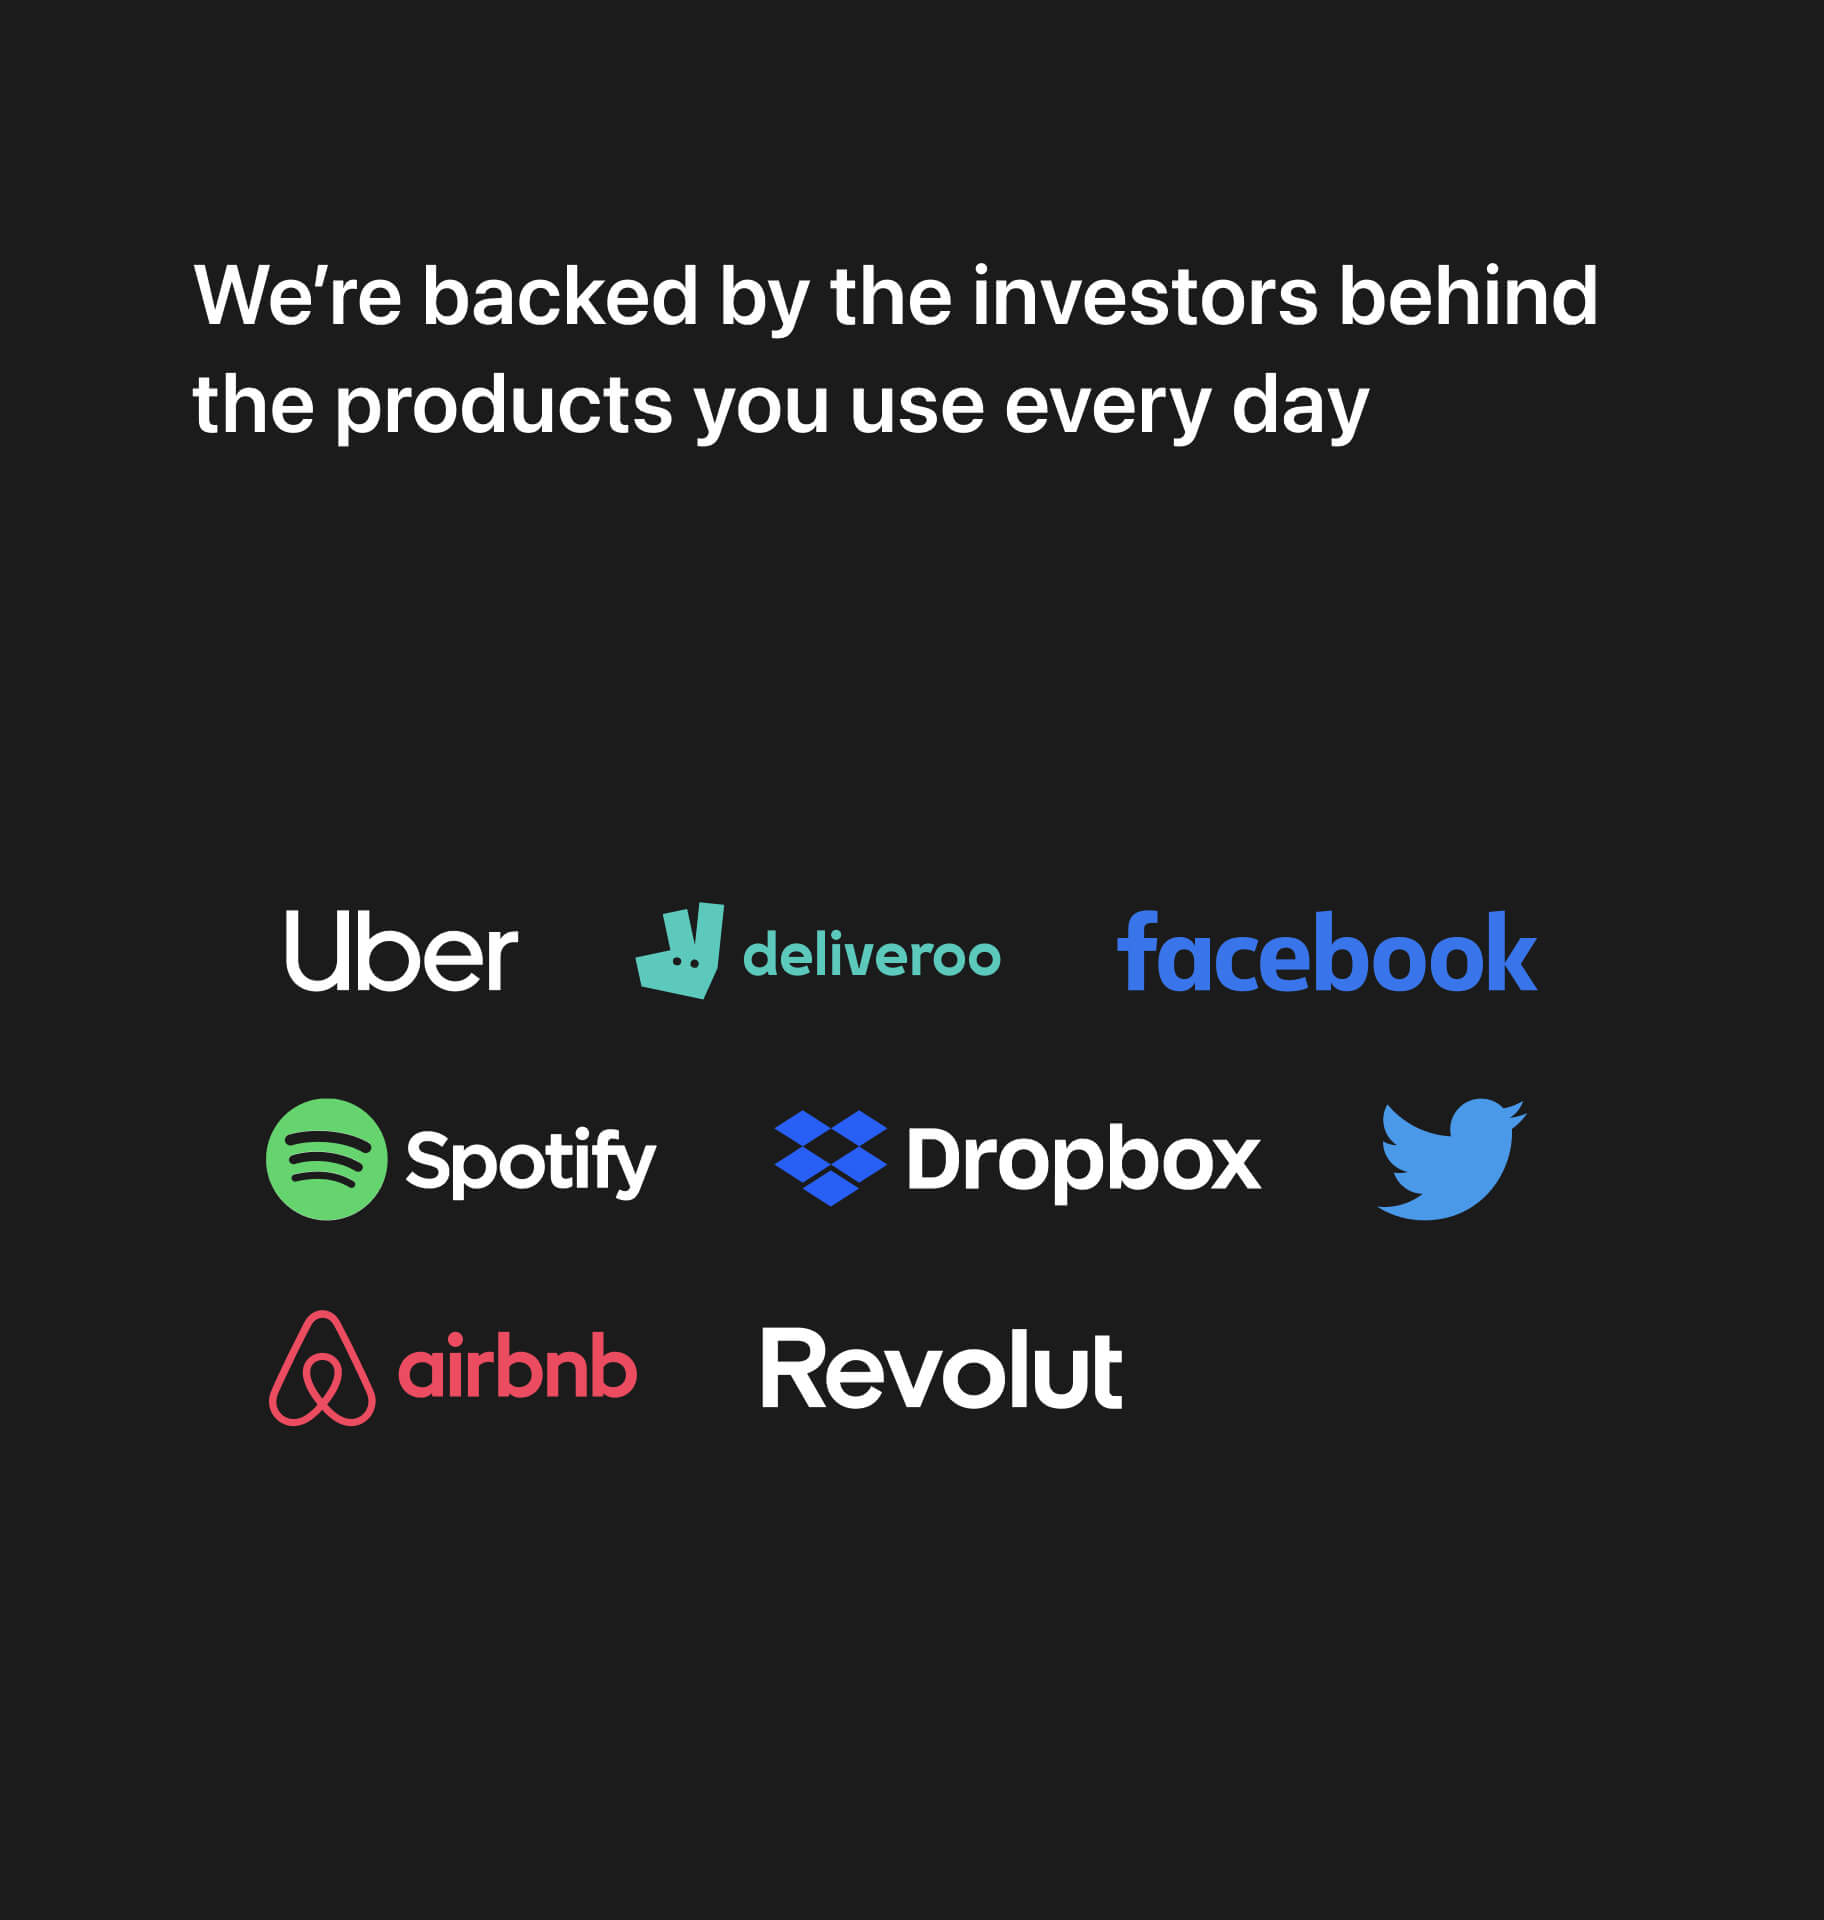 We’re backed by the investors behind the products you use every day